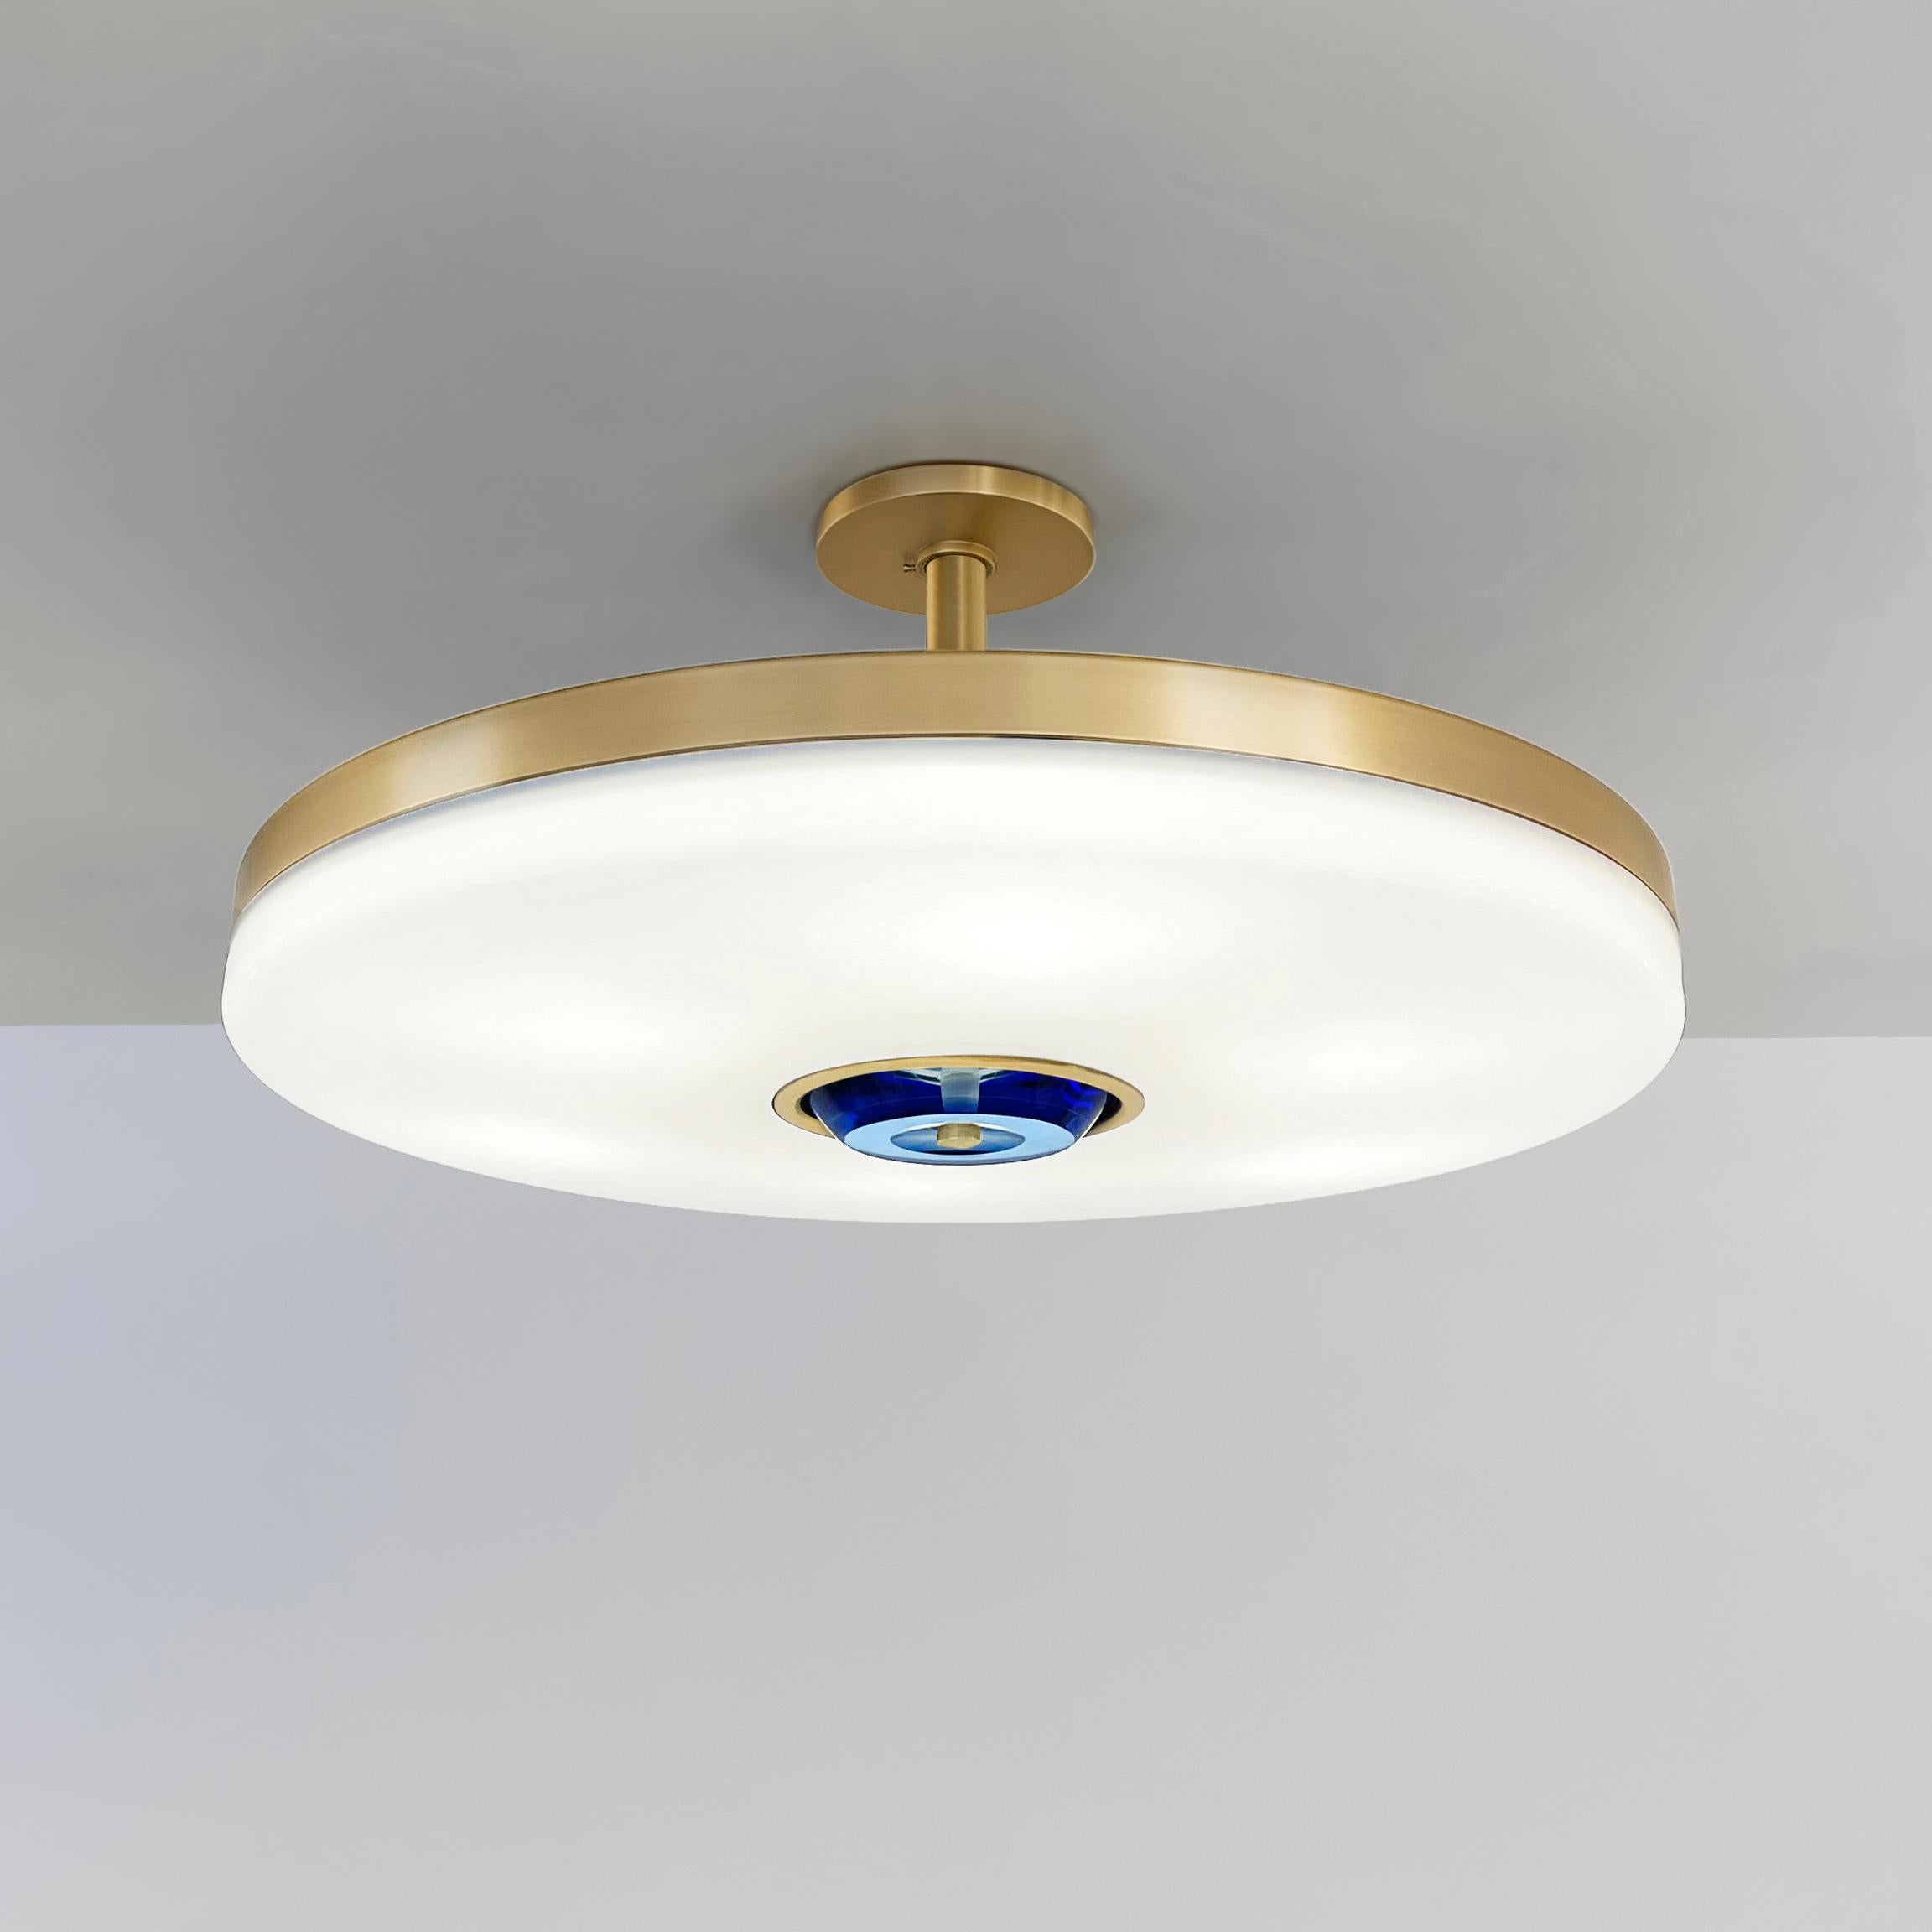 Modern Iris Ceiling Light by Gaspare Asaro - Polished Nickel Finish For Sale